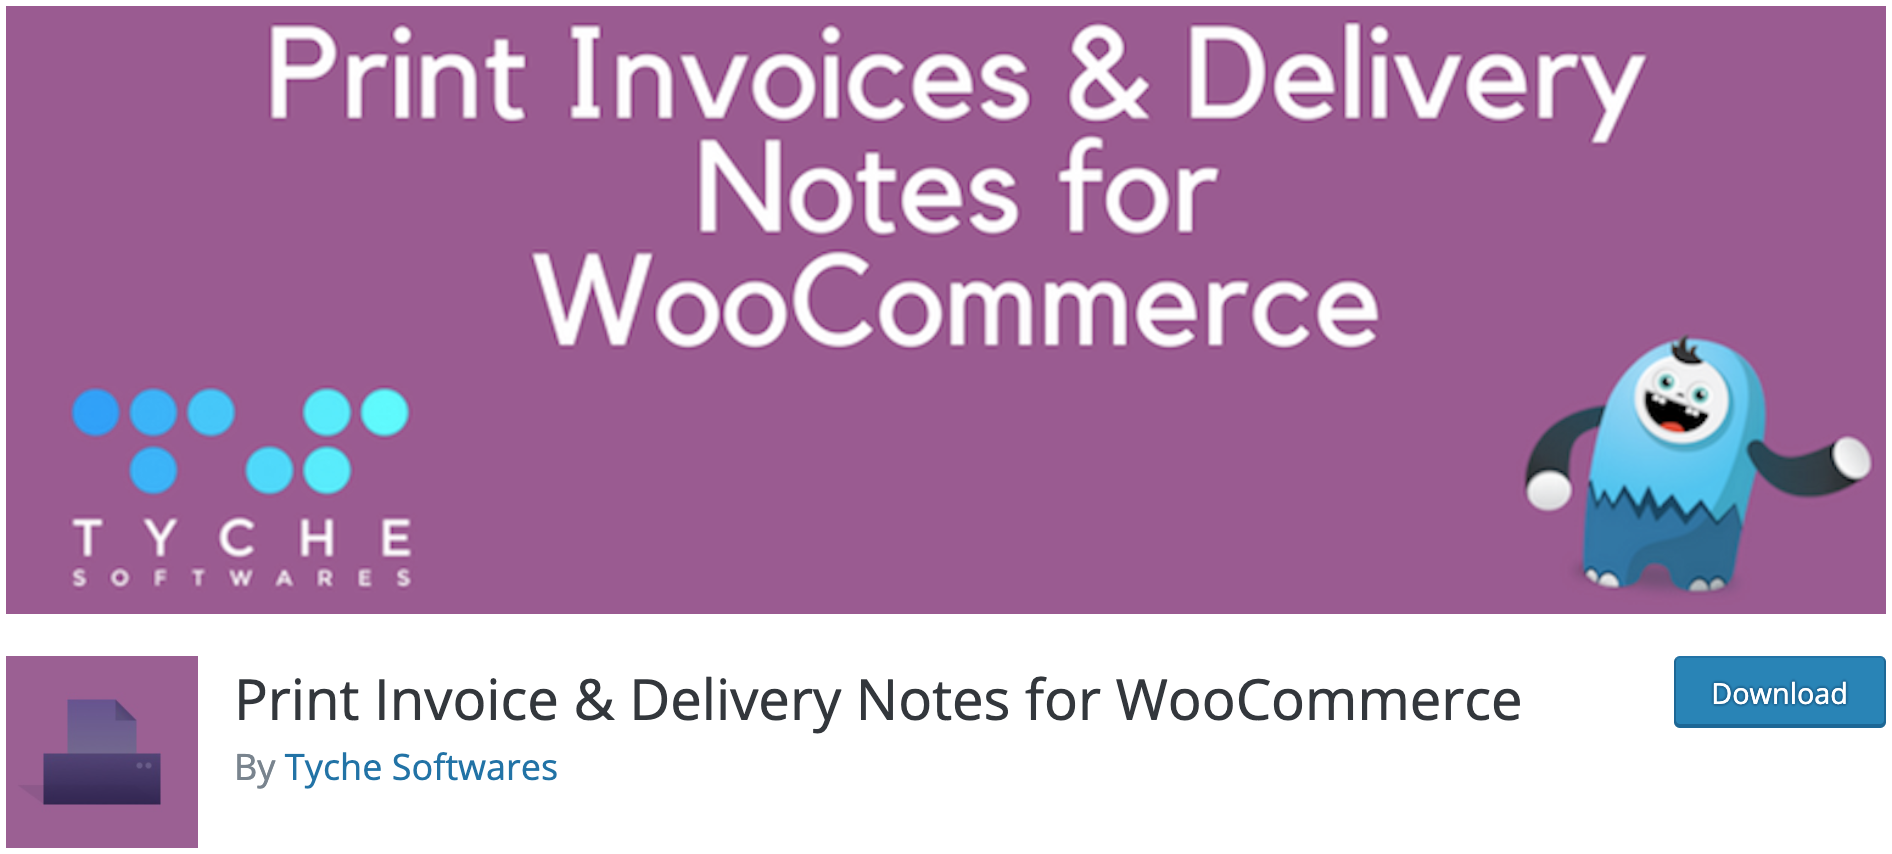 Print Invoice & Delivery Notes for WooCommerce on WordPress directory